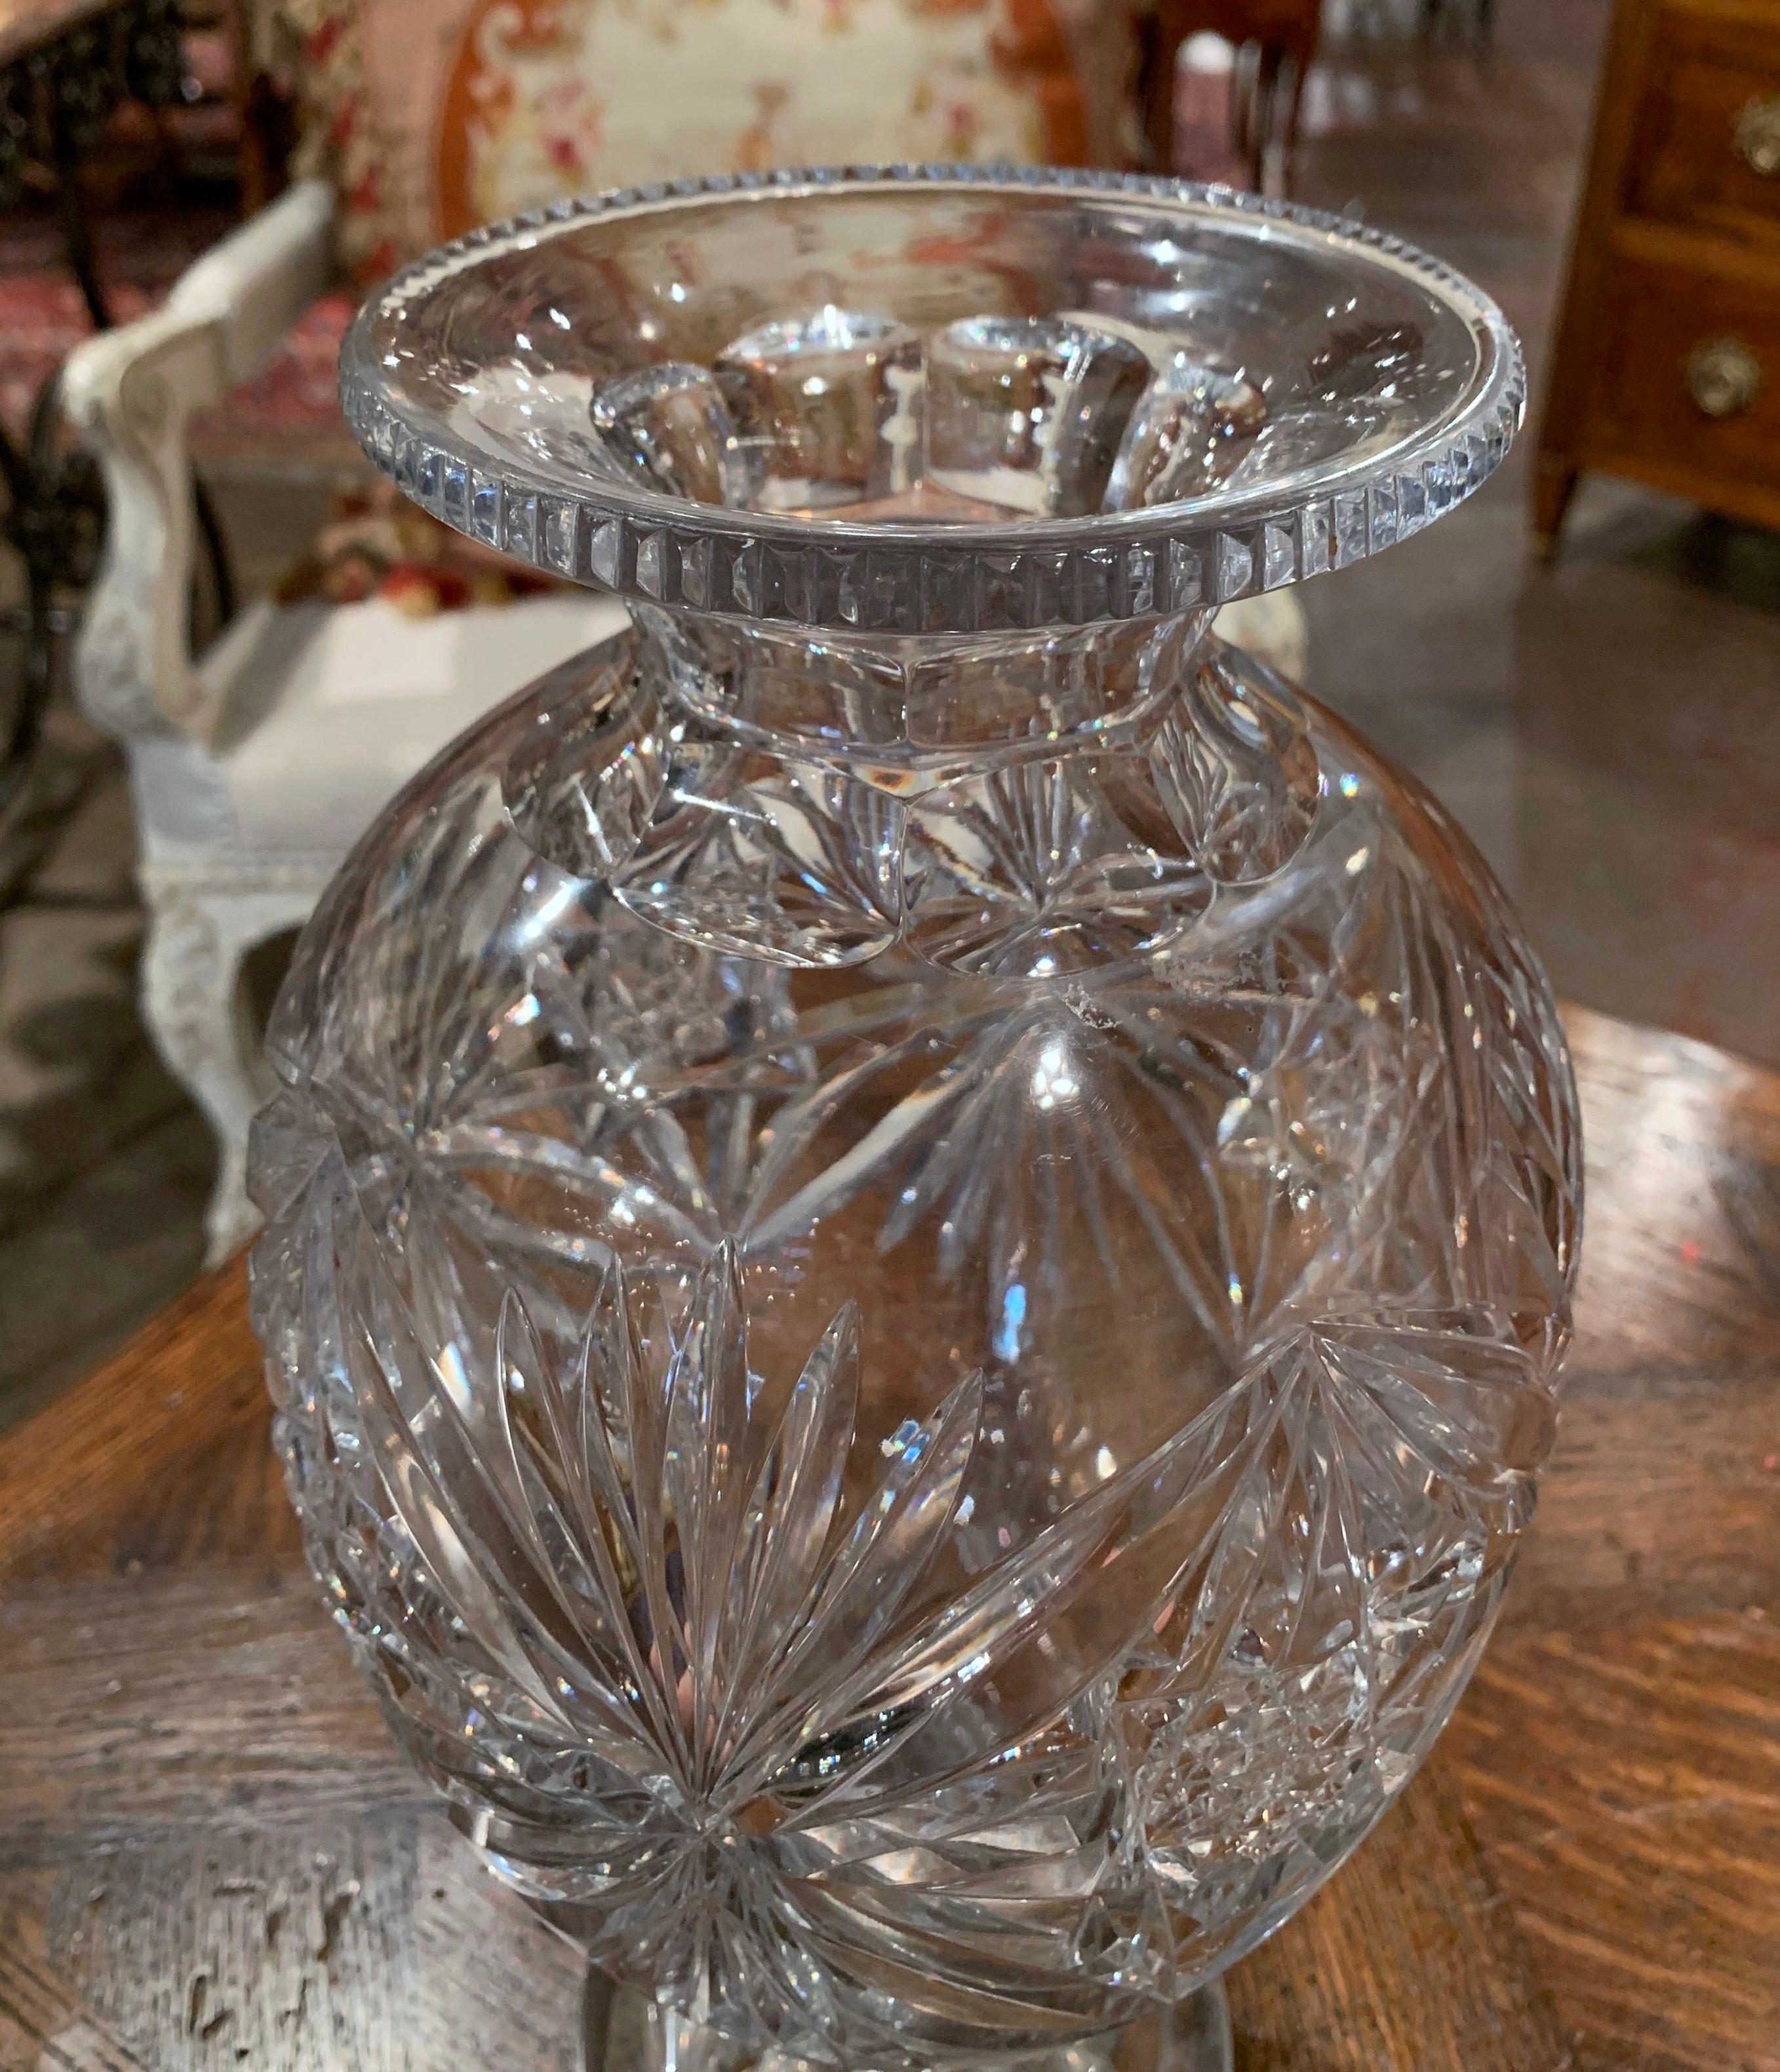 Hand-Crafted Midcentury Clear Cut Glass Vase with Foliage and Star Motifs